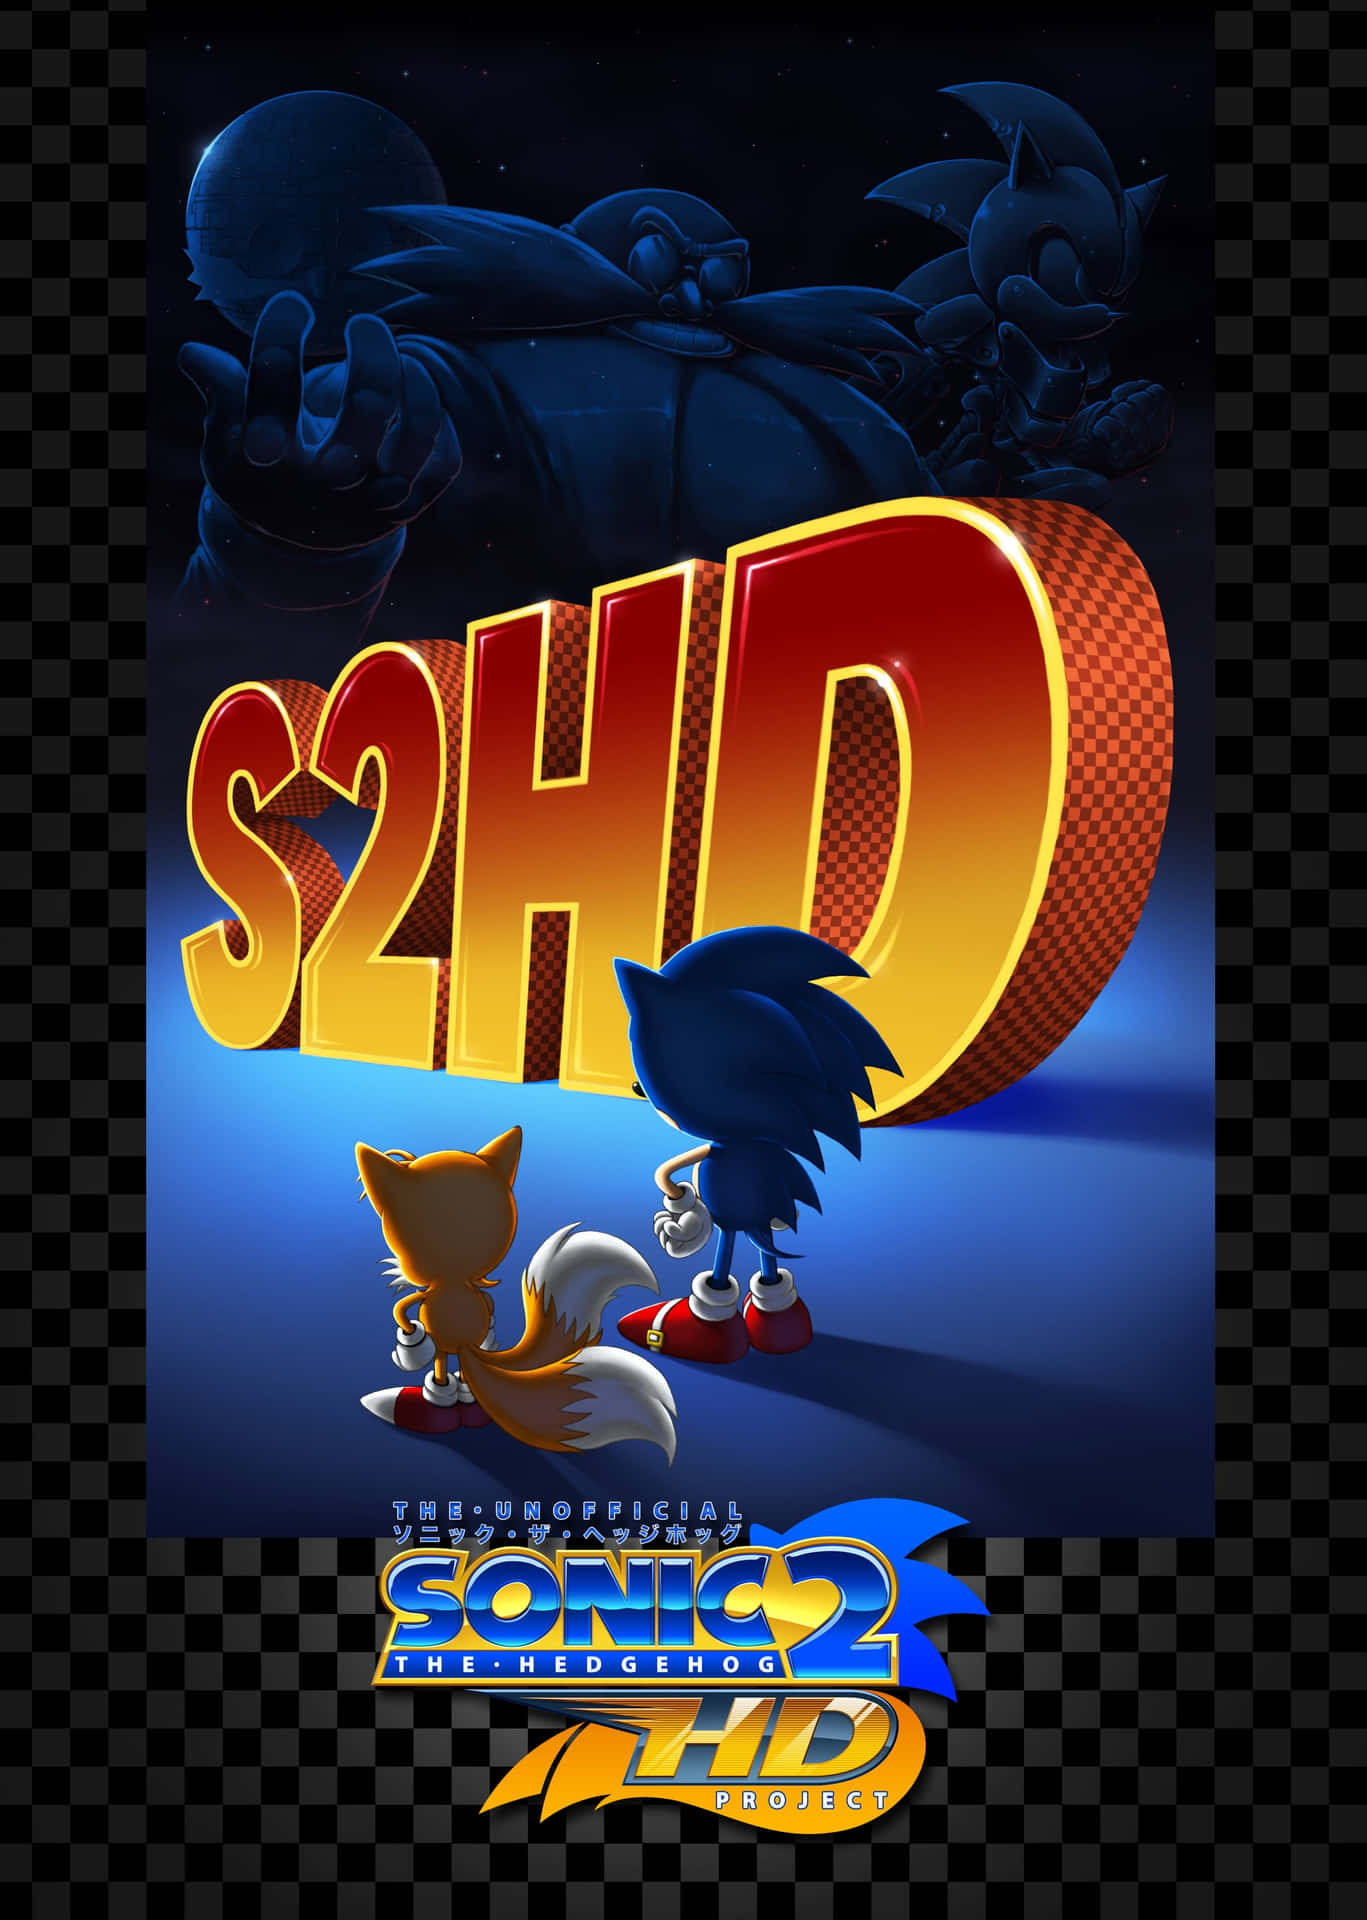 Take on the classic Sonic 2 HD adventure in the palm of your hand Wallpaper